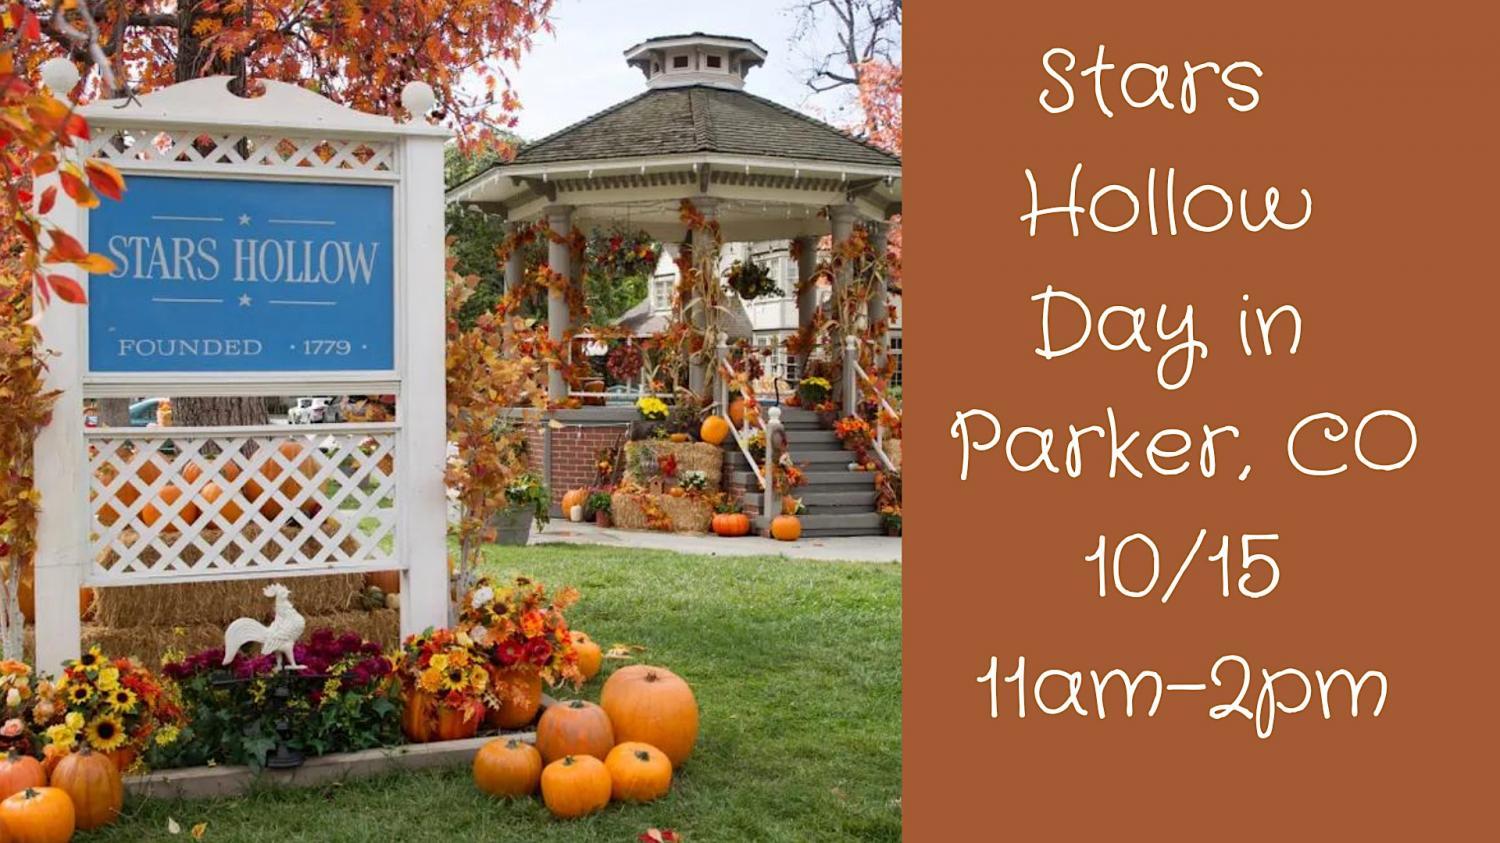 Stars Hollow Day in Parker, CO
Sat Oct 15, 11:00 AM - Sat Oct 15, 7:00 PM